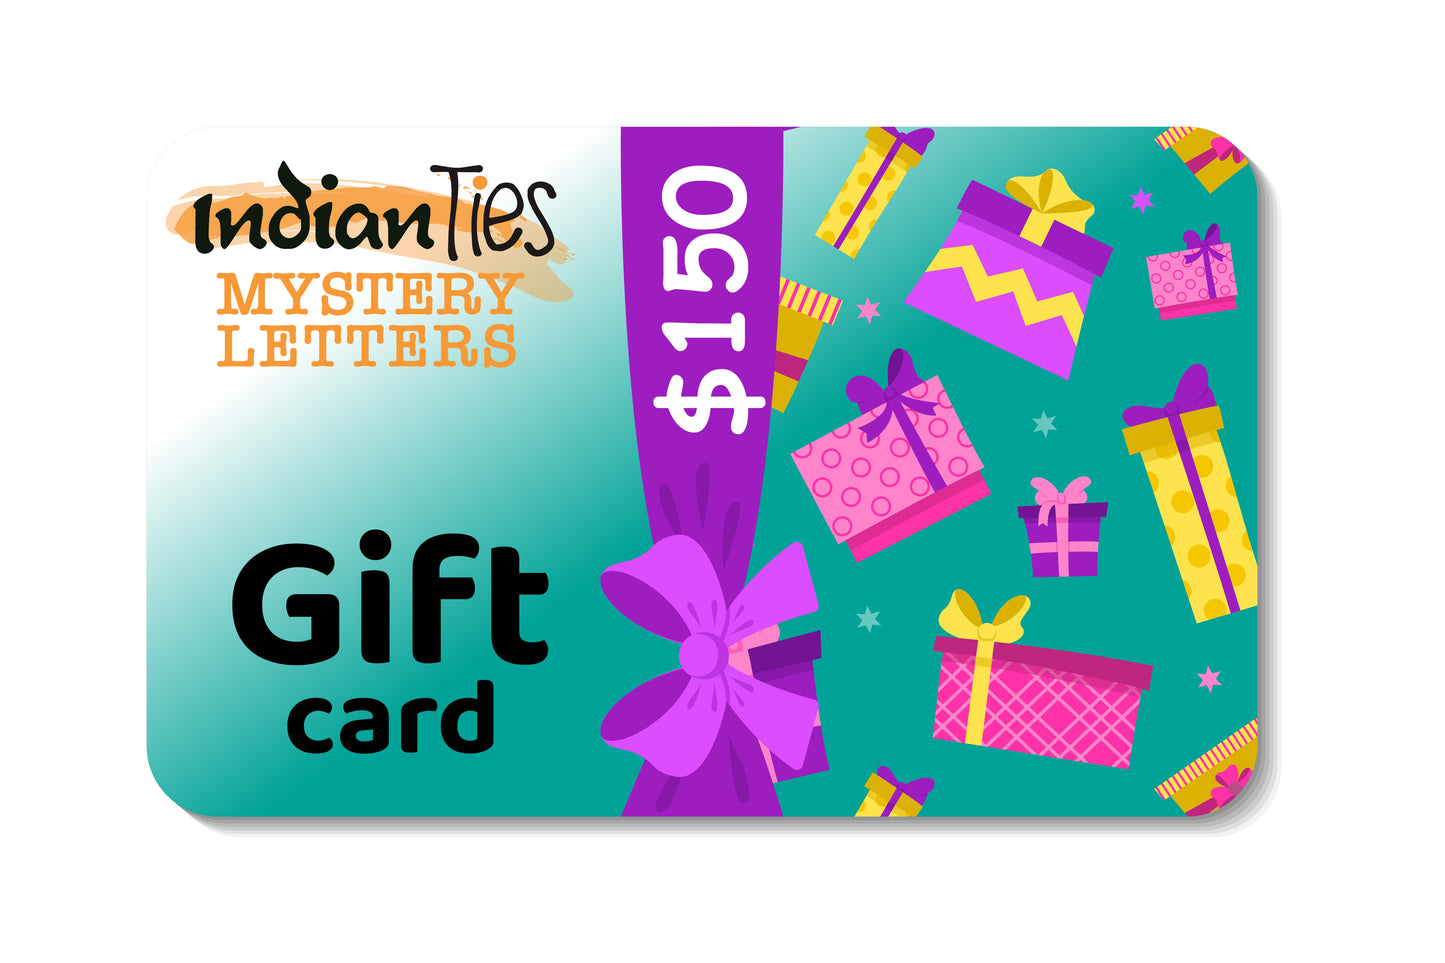 Digital Gift Cards: Give the Gift of IndianTies!